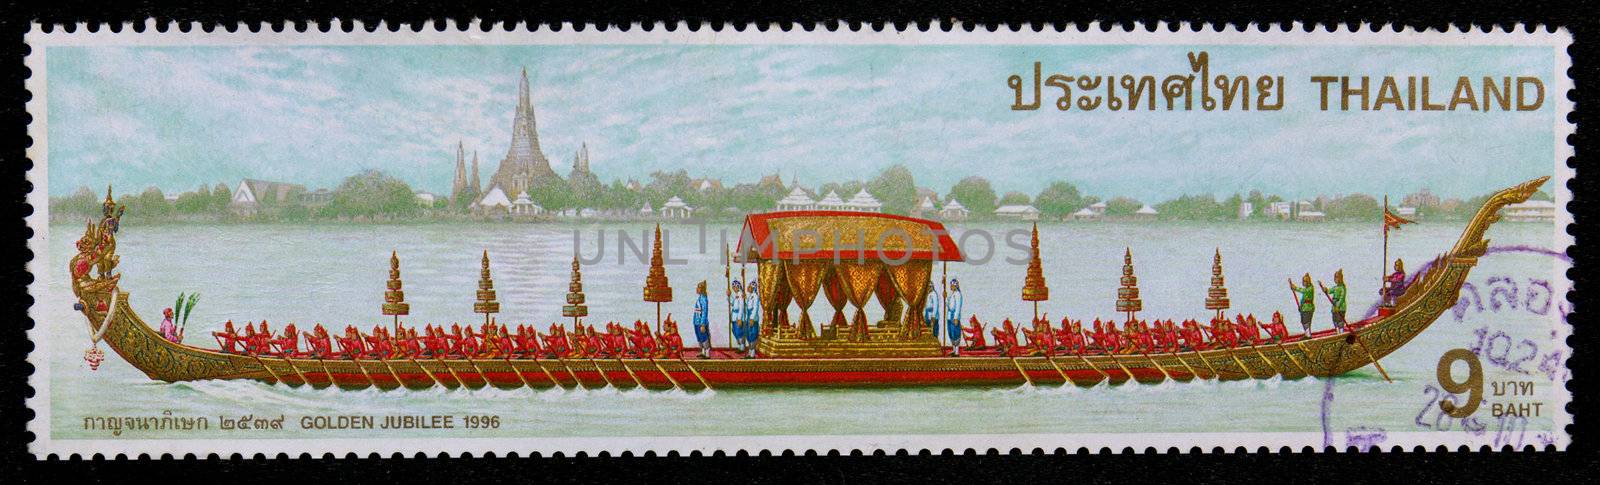 THAILAND - CIRCA 1996: A stamp printed in Thailand shows image of The Royal Barge Garuda with the inscription "Golden Jubilee 1996", circa 1996